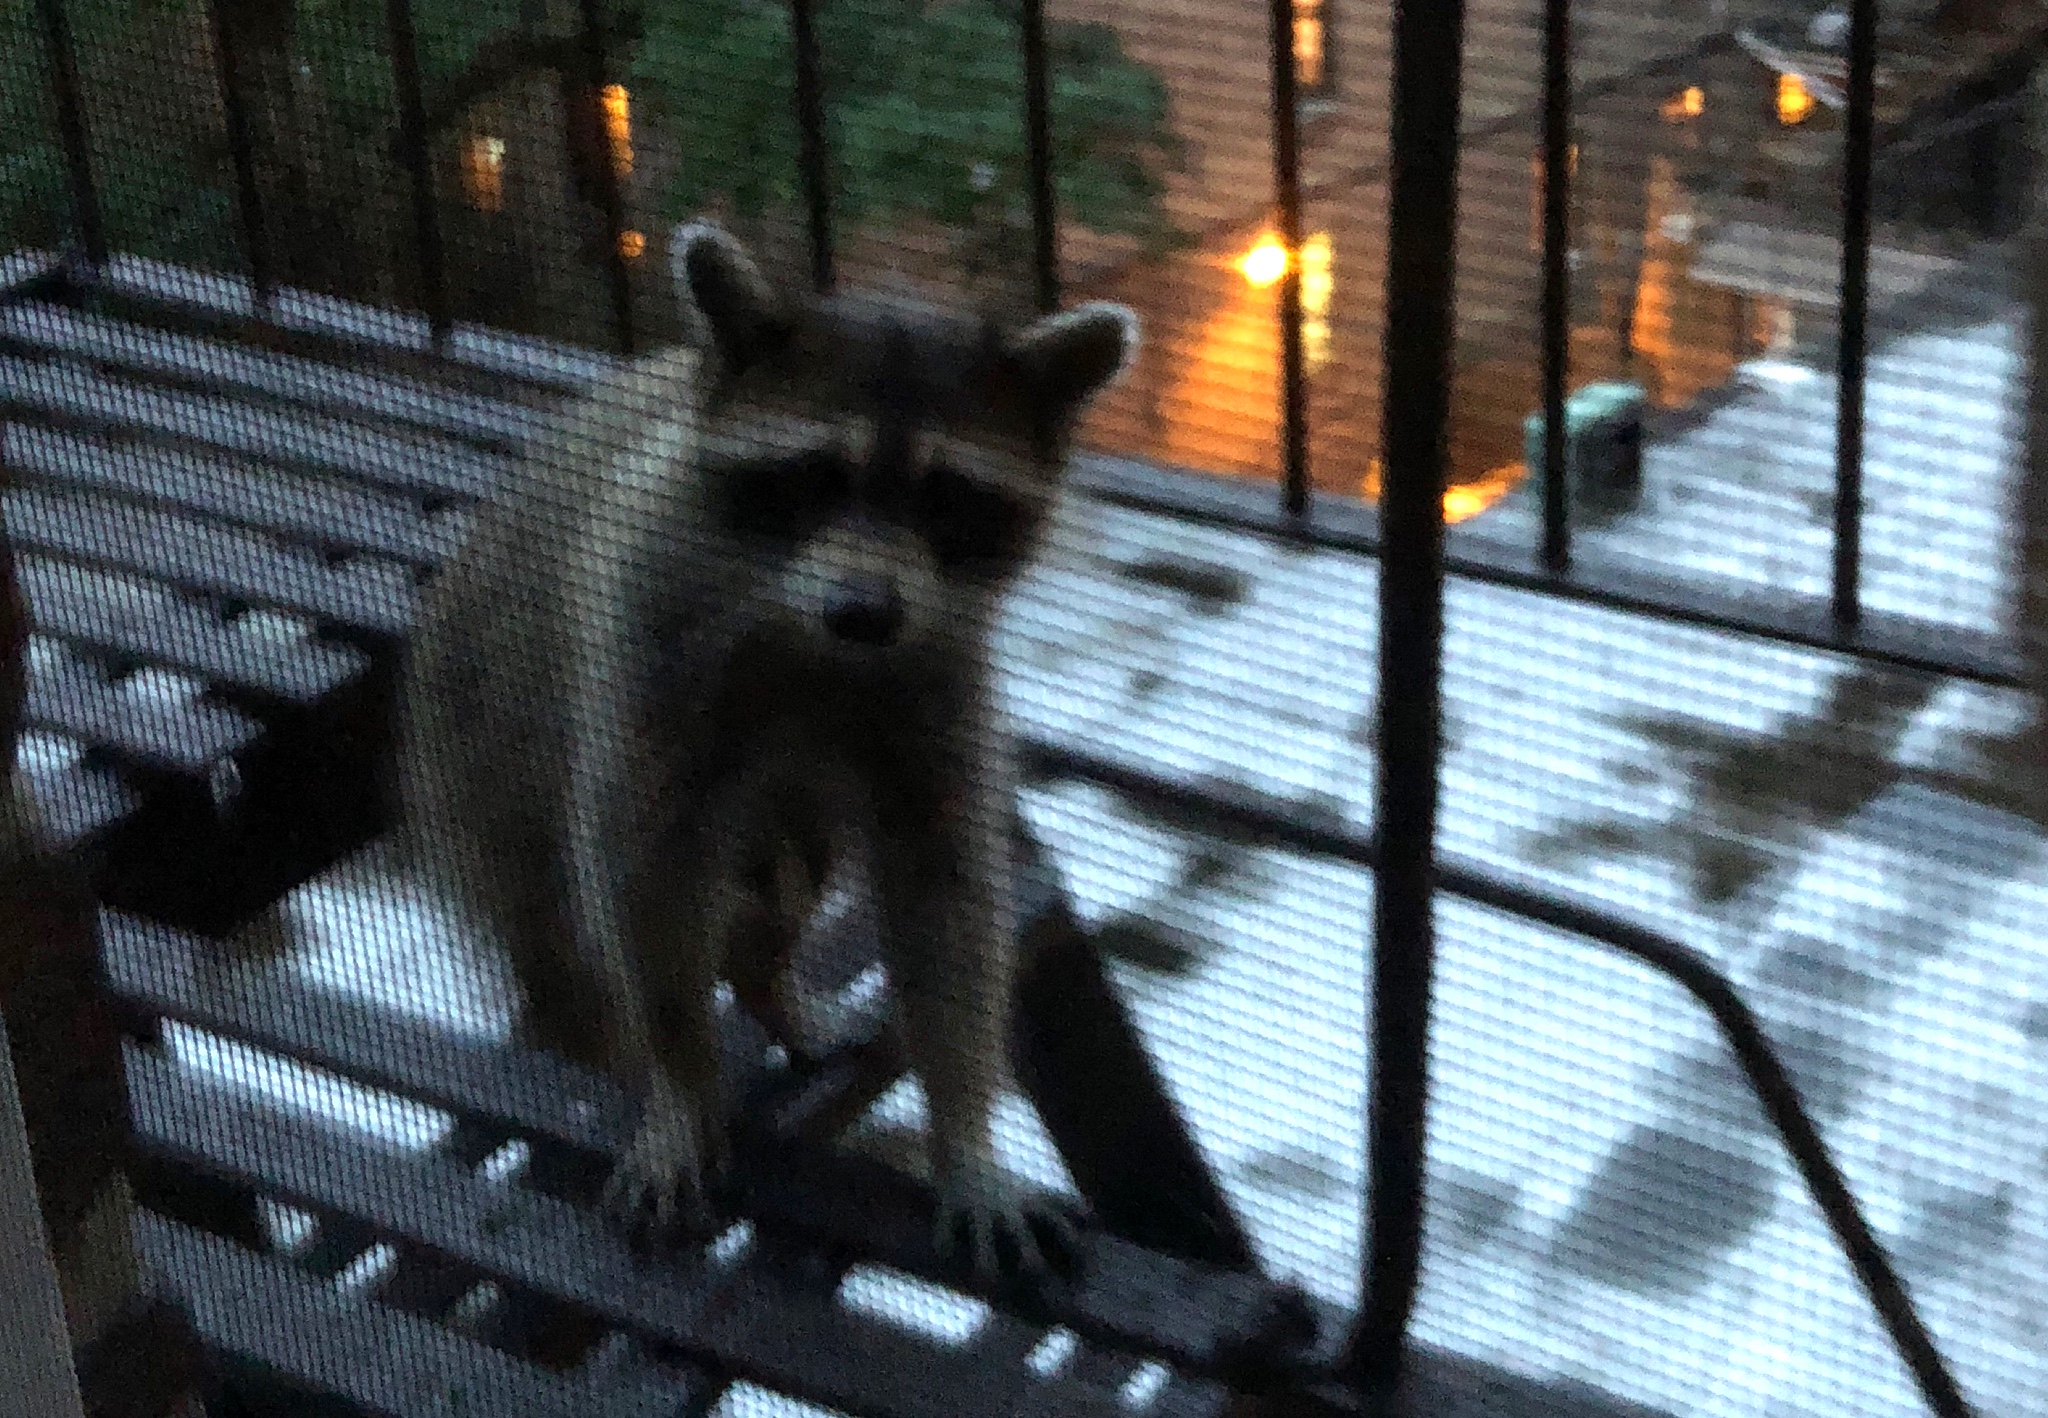 Image of Raccoons in NYC fire escape